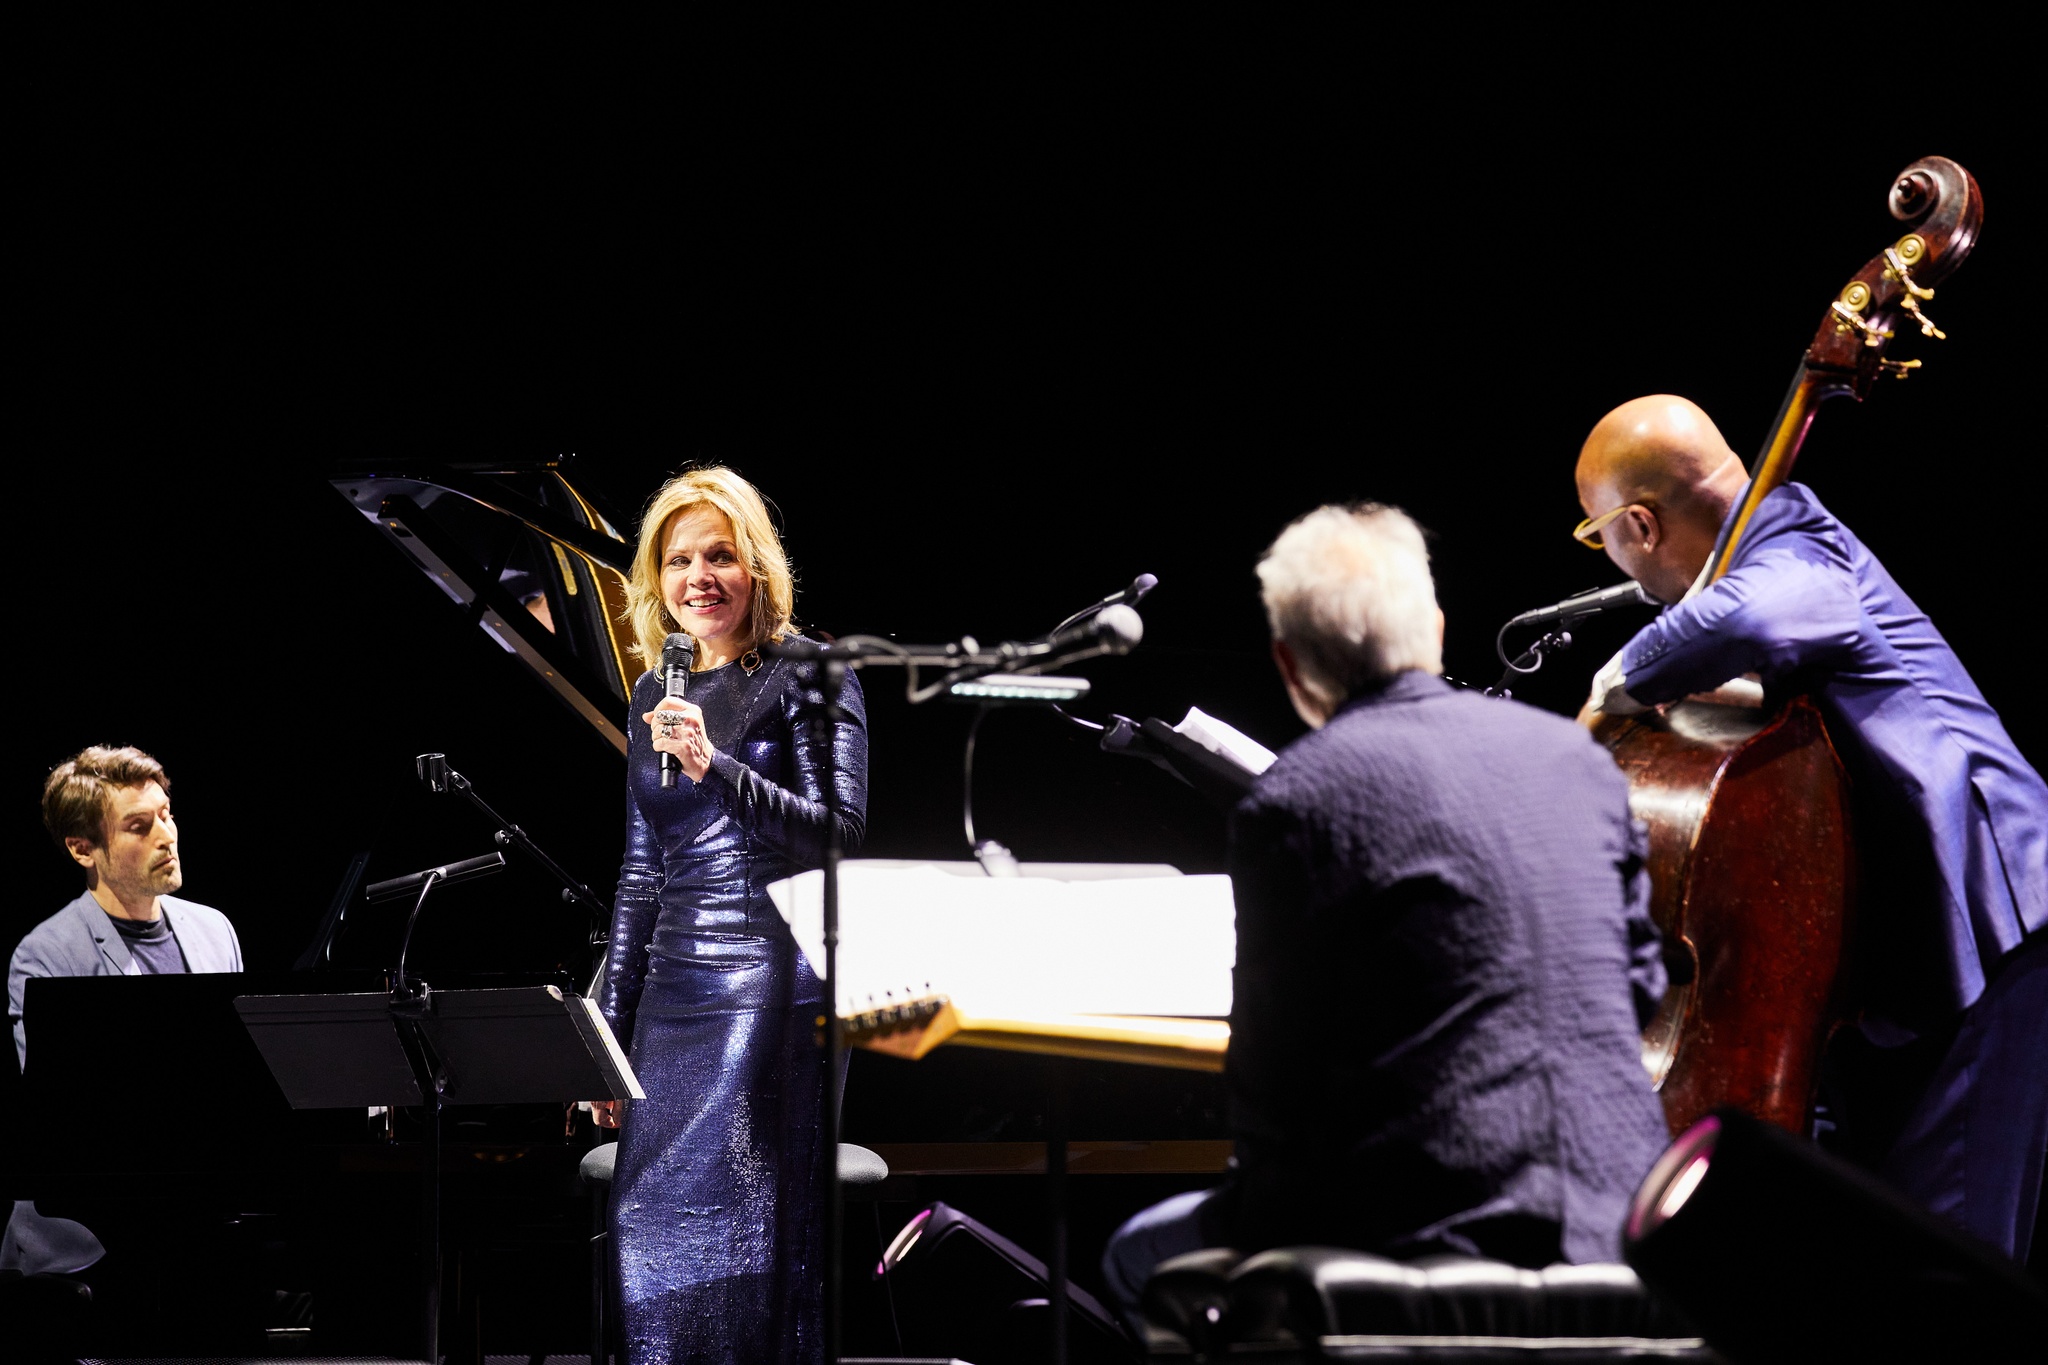 Four musicians on stage, a man seated at a piano, a woman in a purple dress holding a microphone, and two men seated with a bass and a guitar respectively